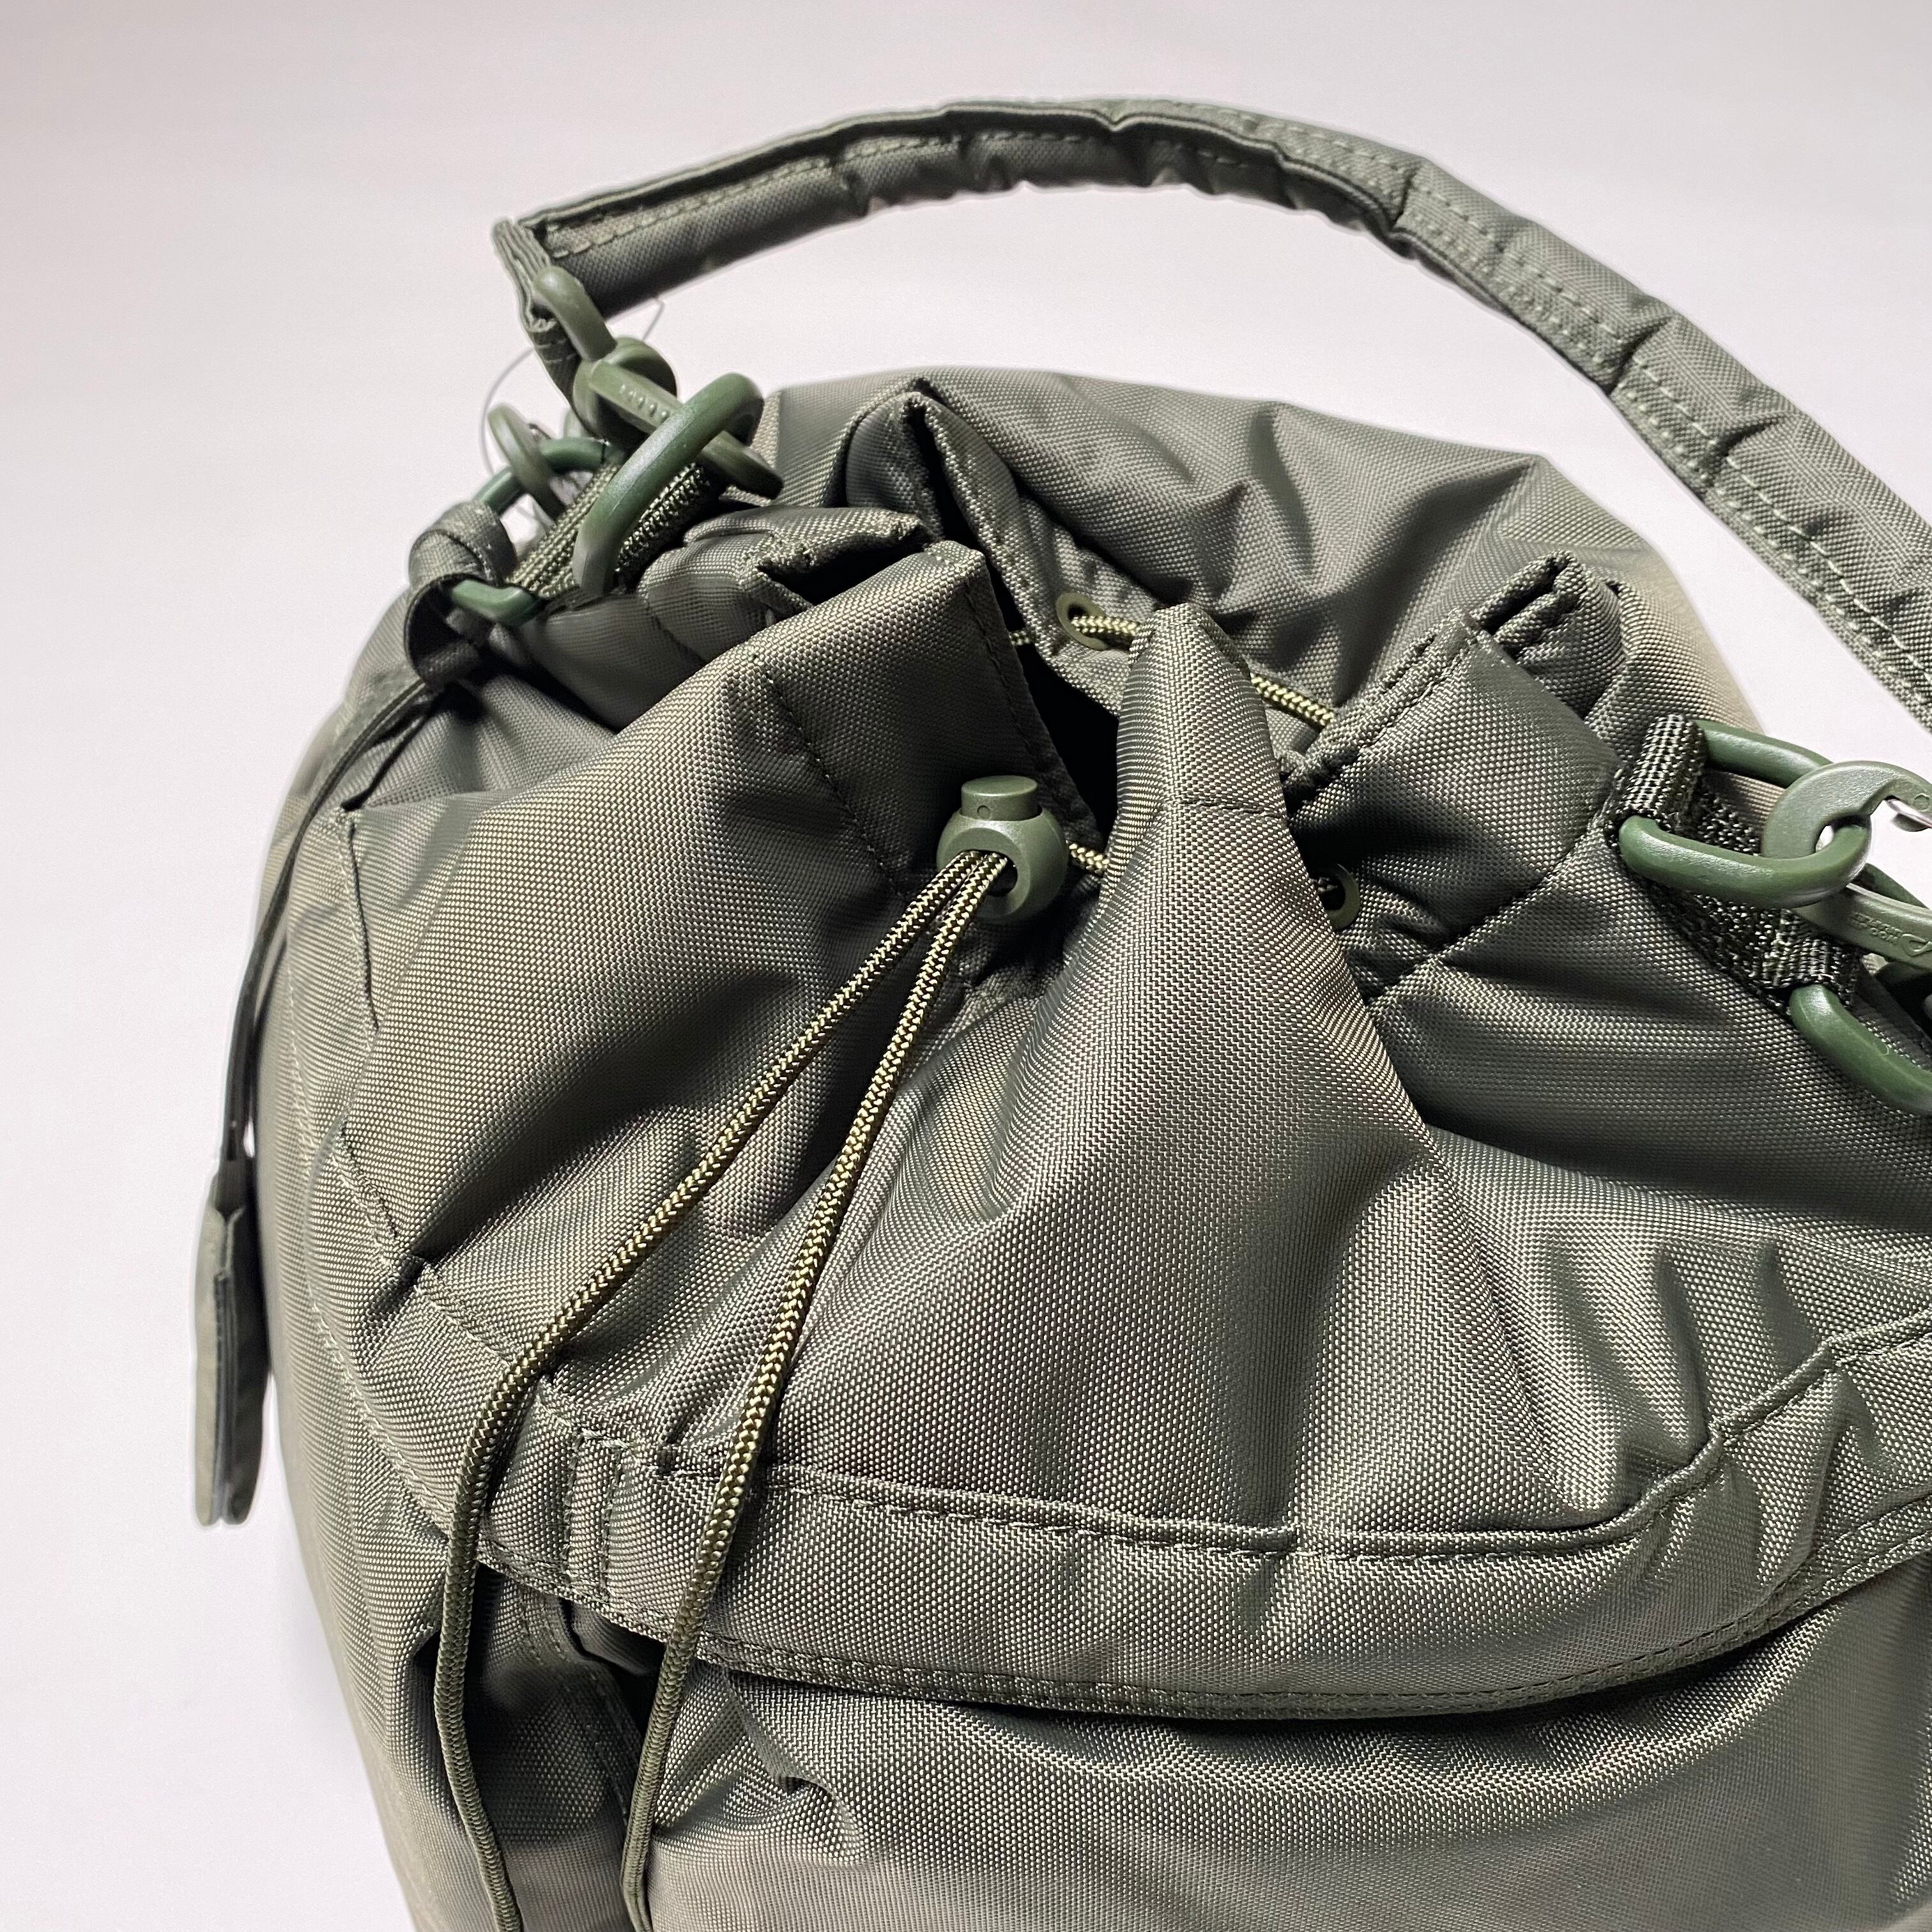 HYKE【ハイク】 2 WAY TOOL BAG ( LARGE SIZE ) No.19251 OLIVE DRAB. | glamour  online powered by BASE